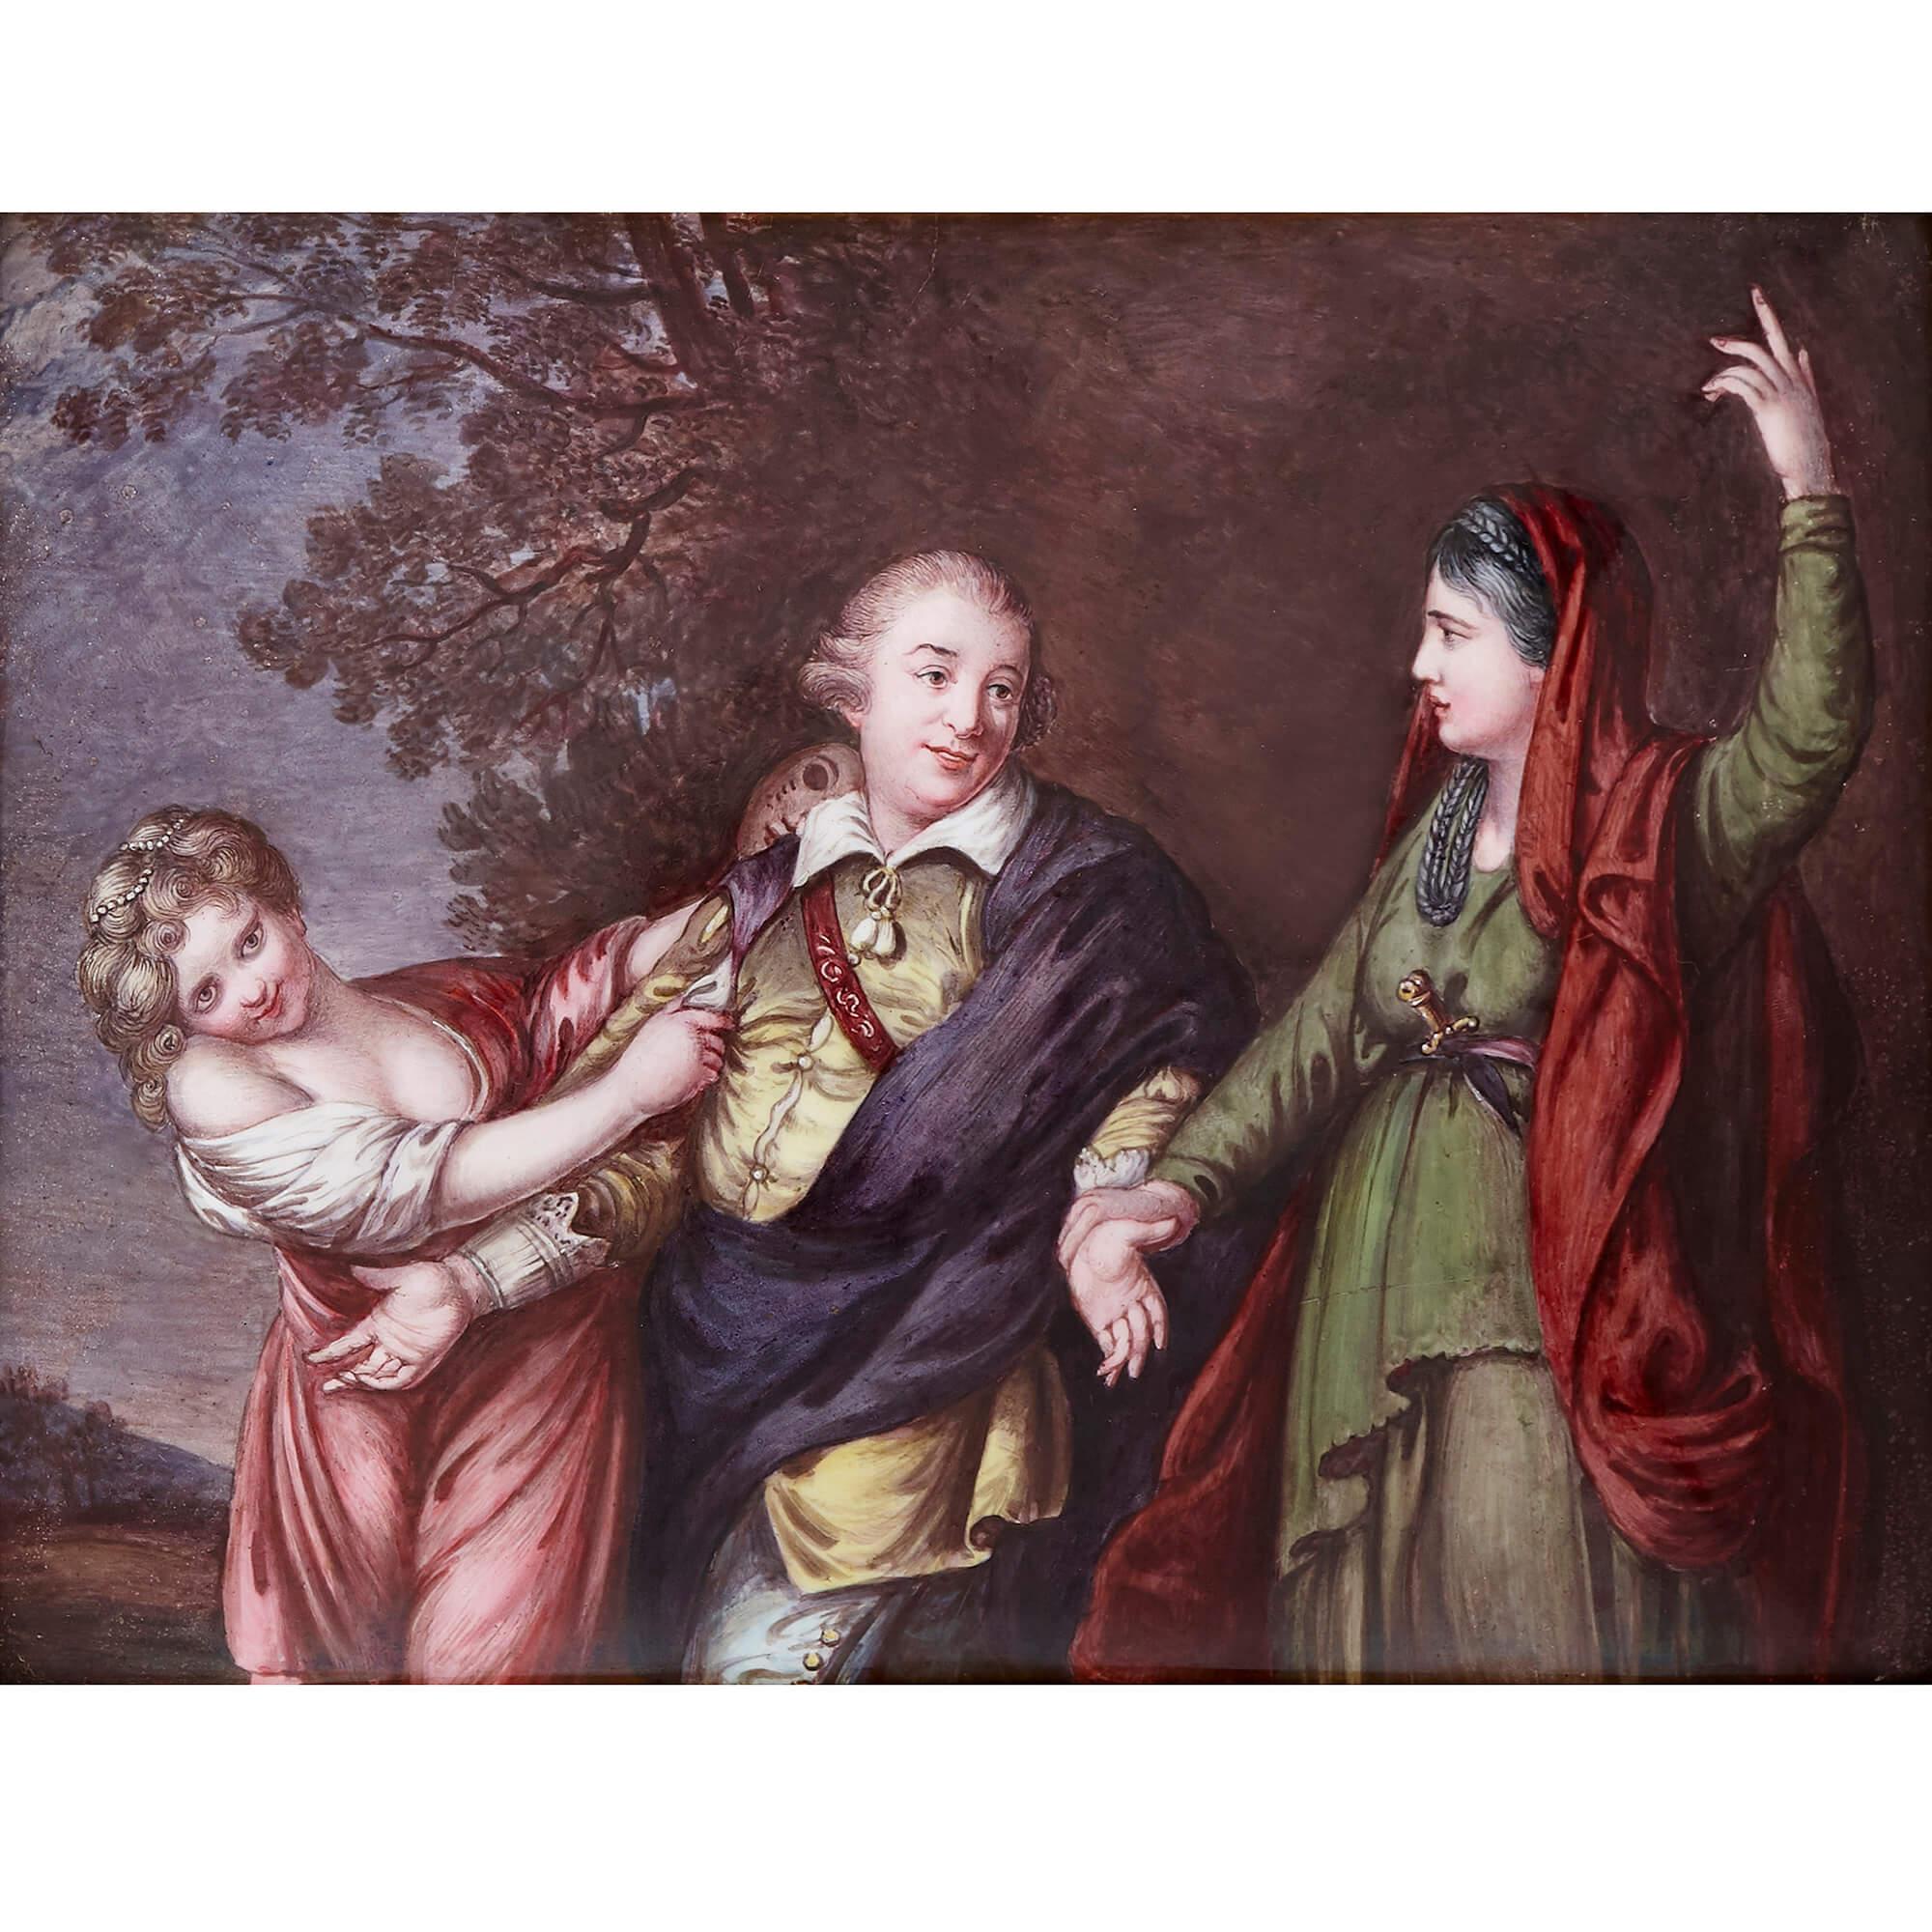 This charming enamel painting shows a gentleman, centrally positioned, being led by two women, one on each arm. The woman on his left has a troubled expression, her hair is grey, and she wears a dark red shawl and green costume, with a knife stored